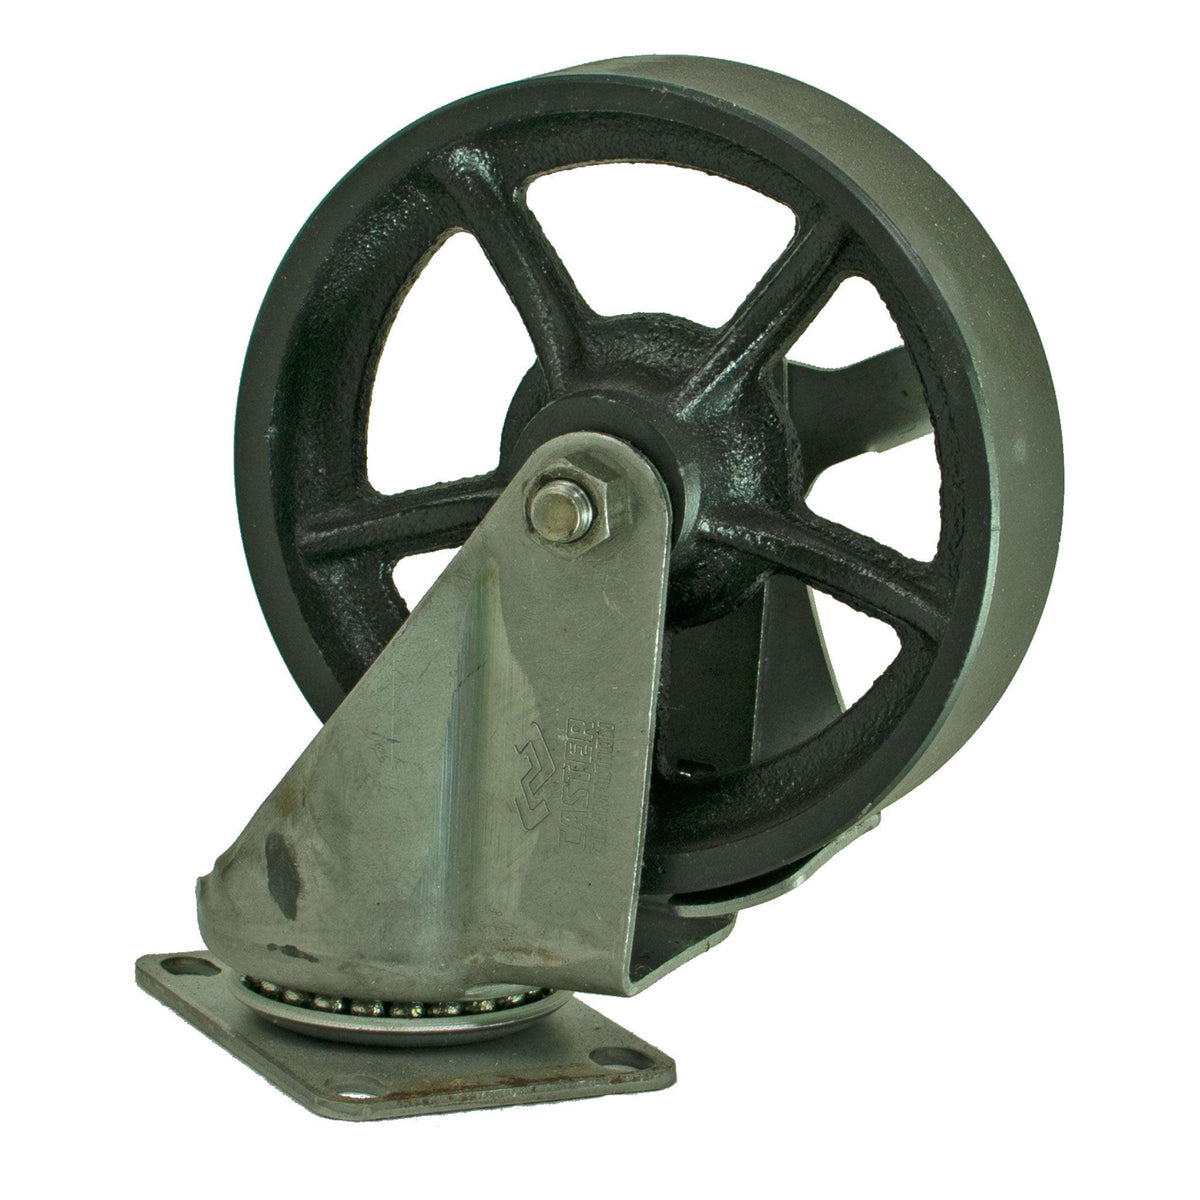 Lee Display's Vintage Casters are swivel and have a 360° turning radius.